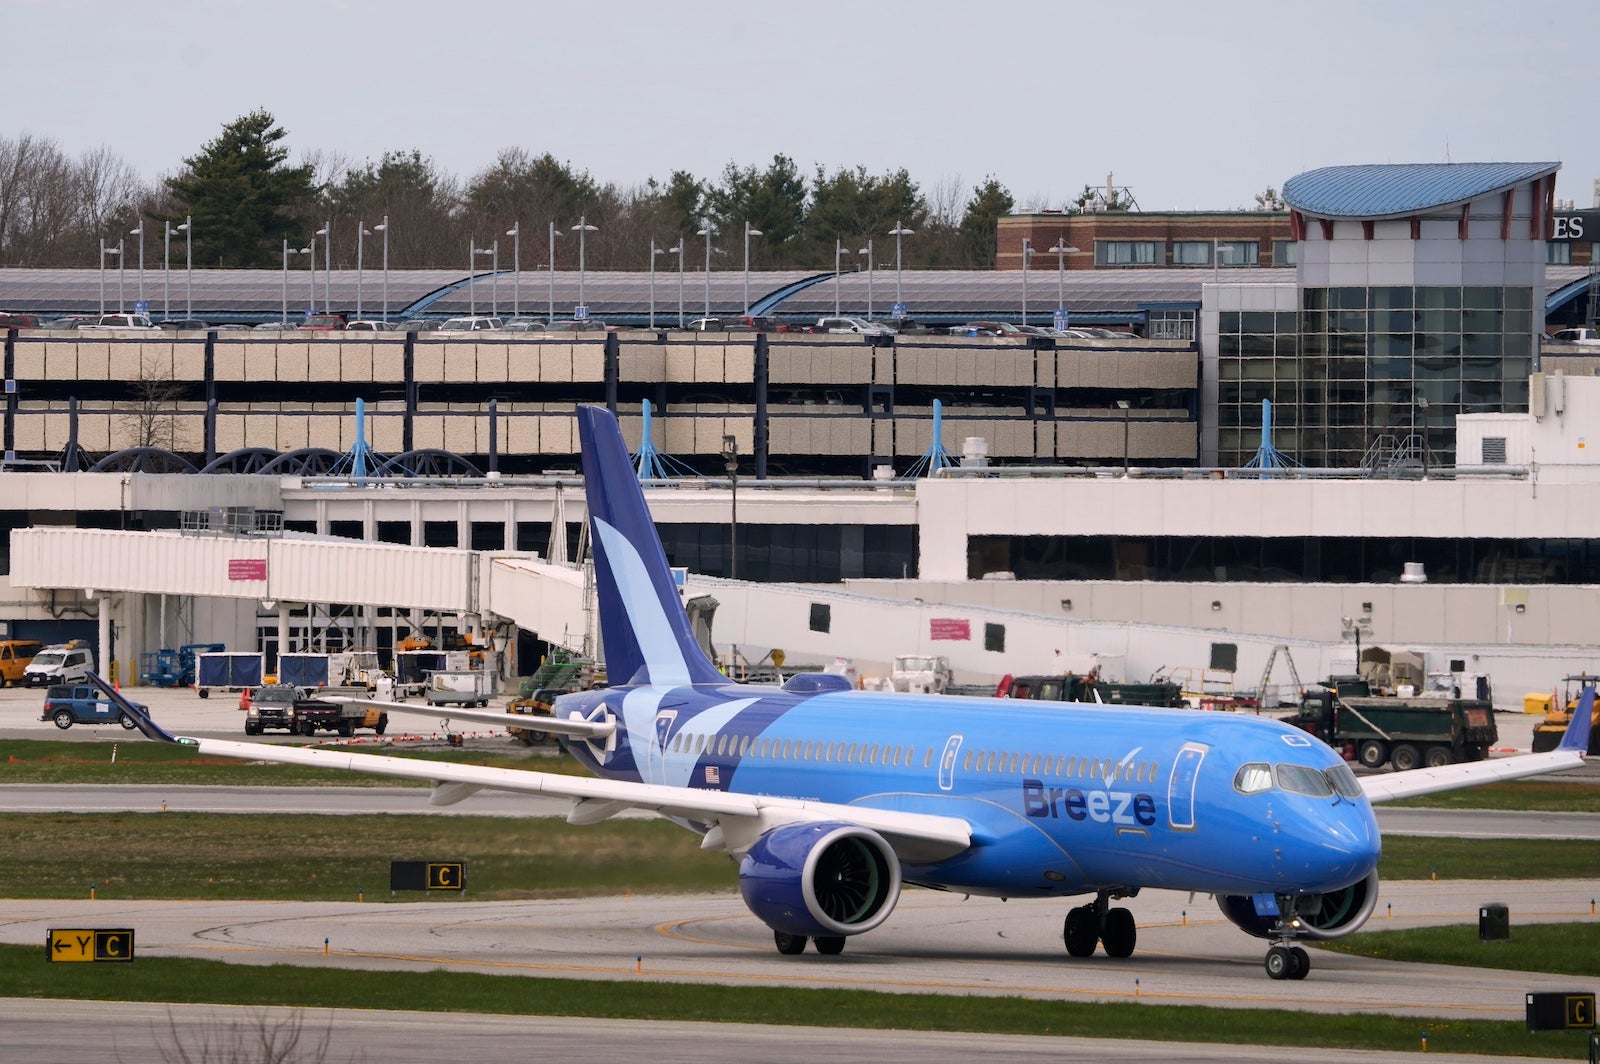 Breeze adds 3 Florida routes from Northeast, including new nonstop from Long Island